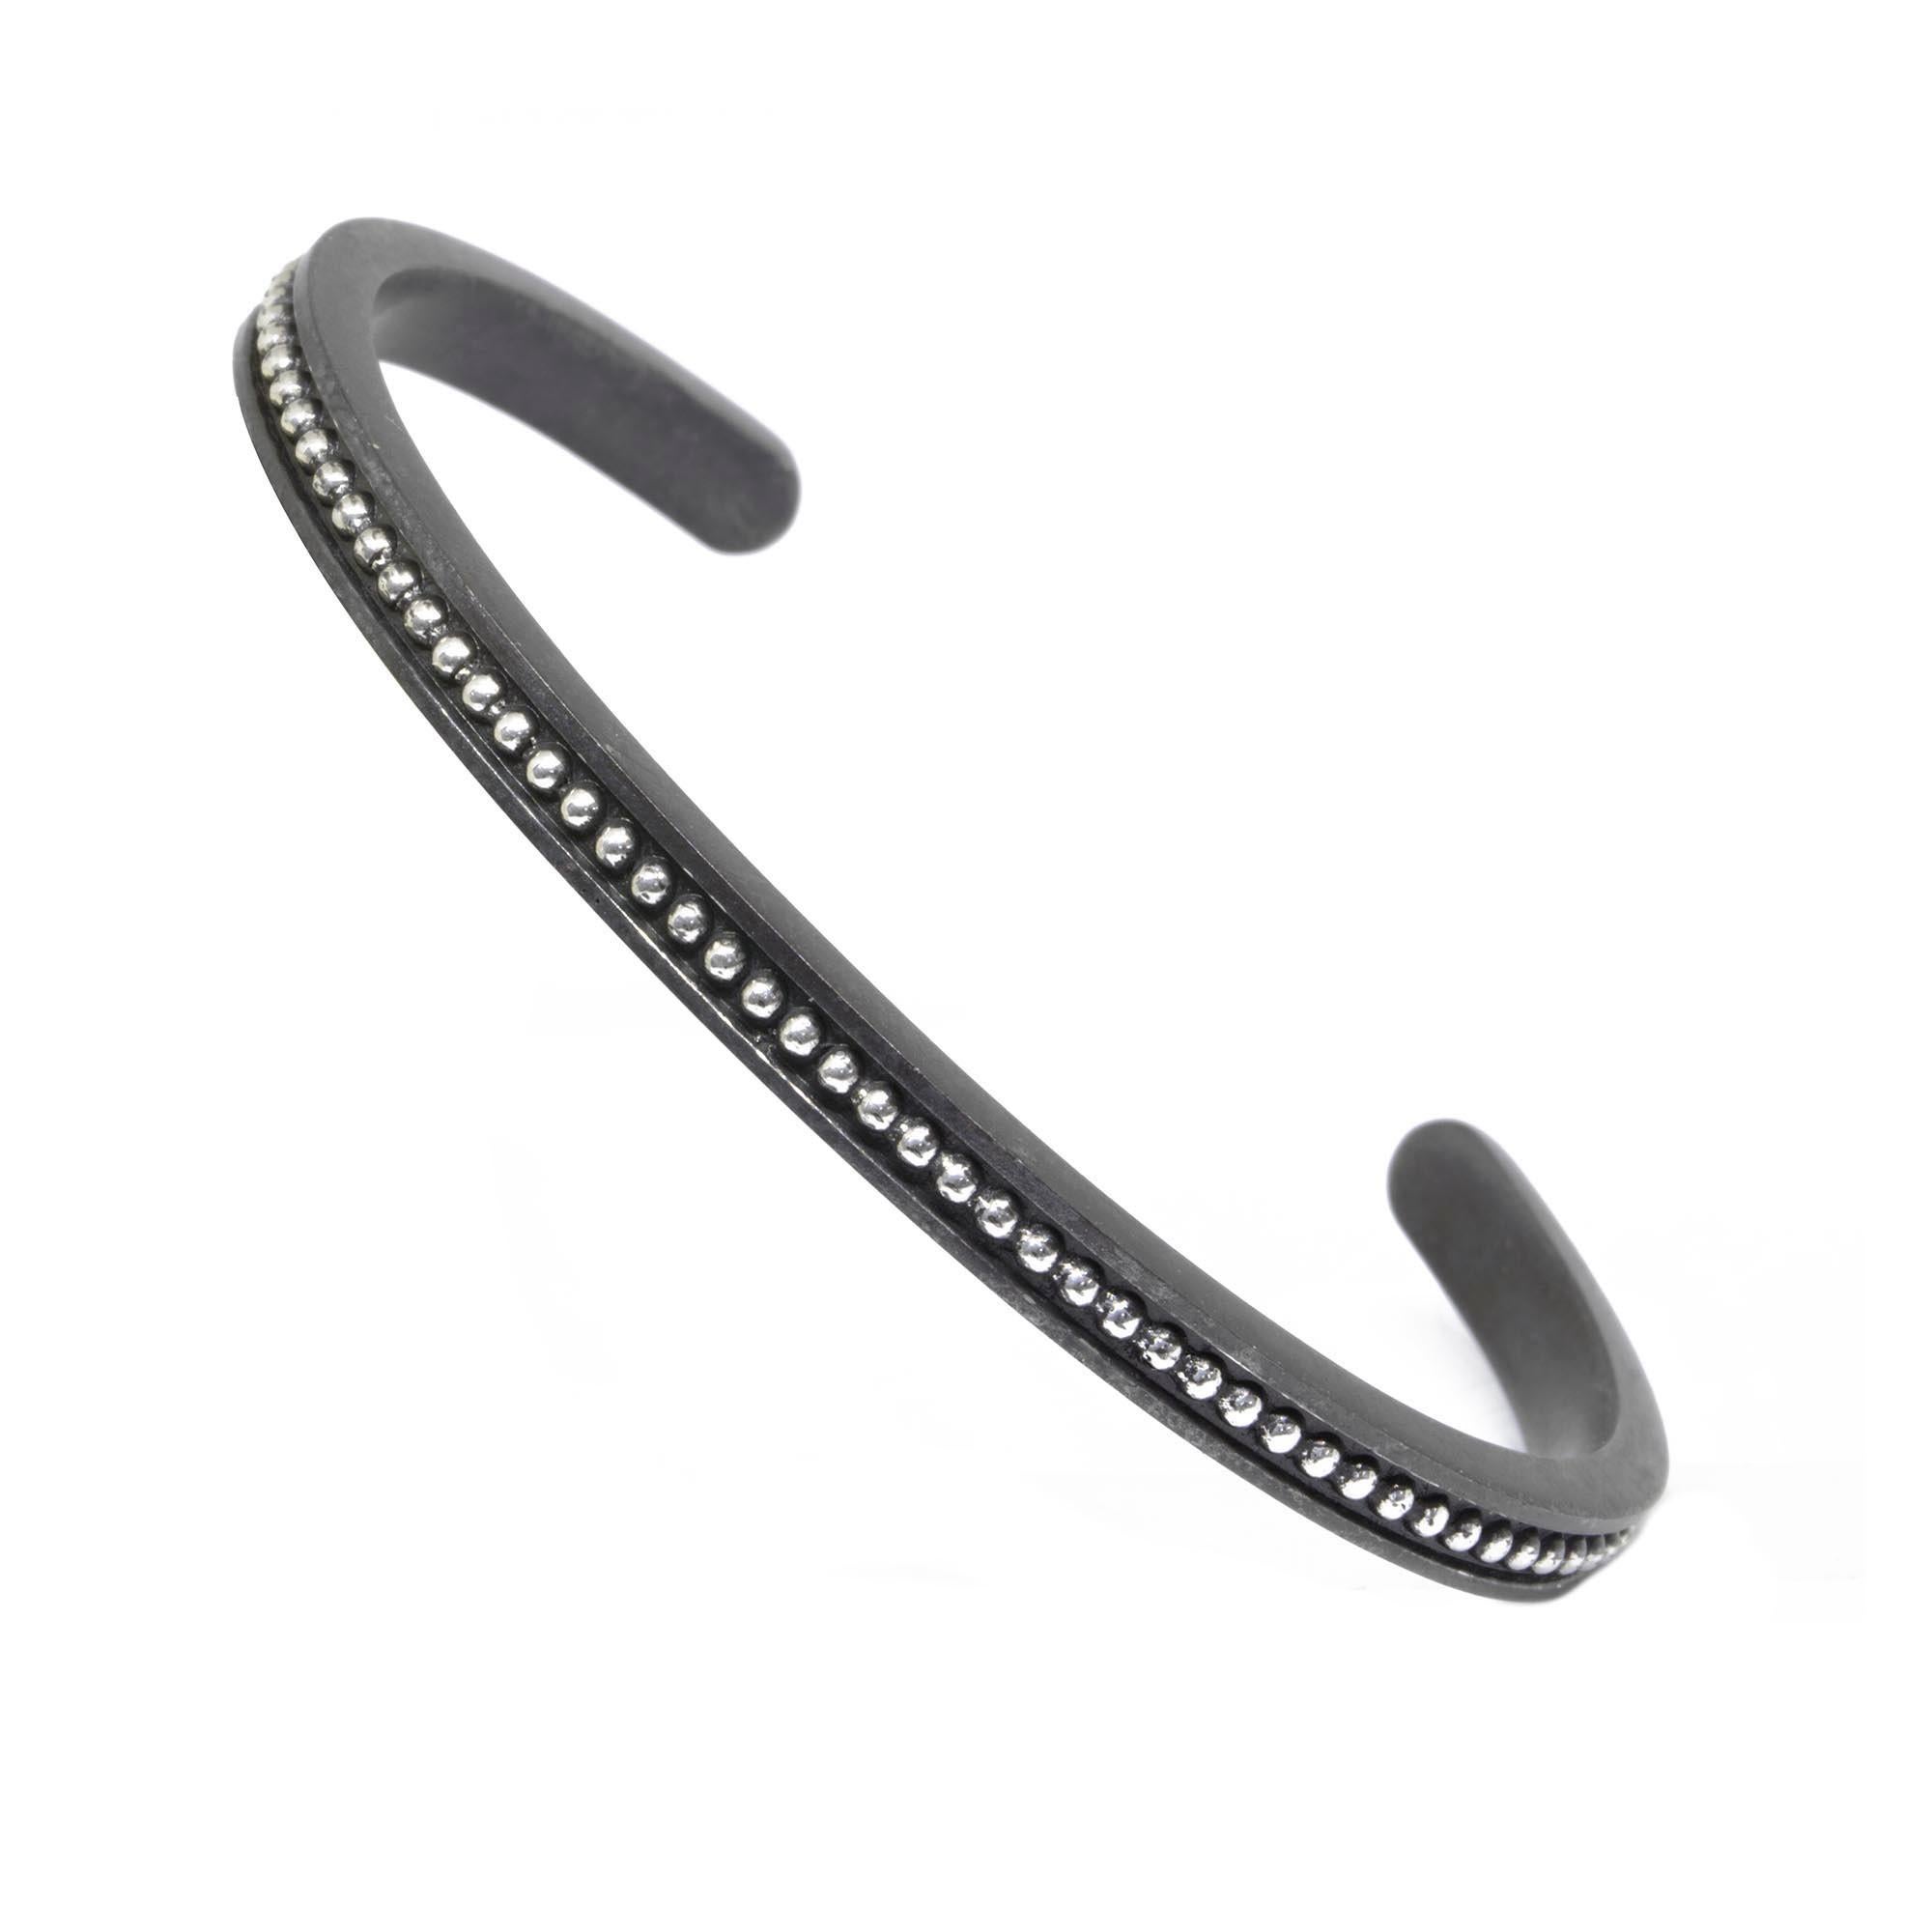 Start your Nina Nguyen collection here. A jewelry wardrobe essential to anchor any bracelet stack, this slender cuff pairs blackened silver with lighter, lustrous sliver granules. Combining a classic design with chic details and a neutral metallic